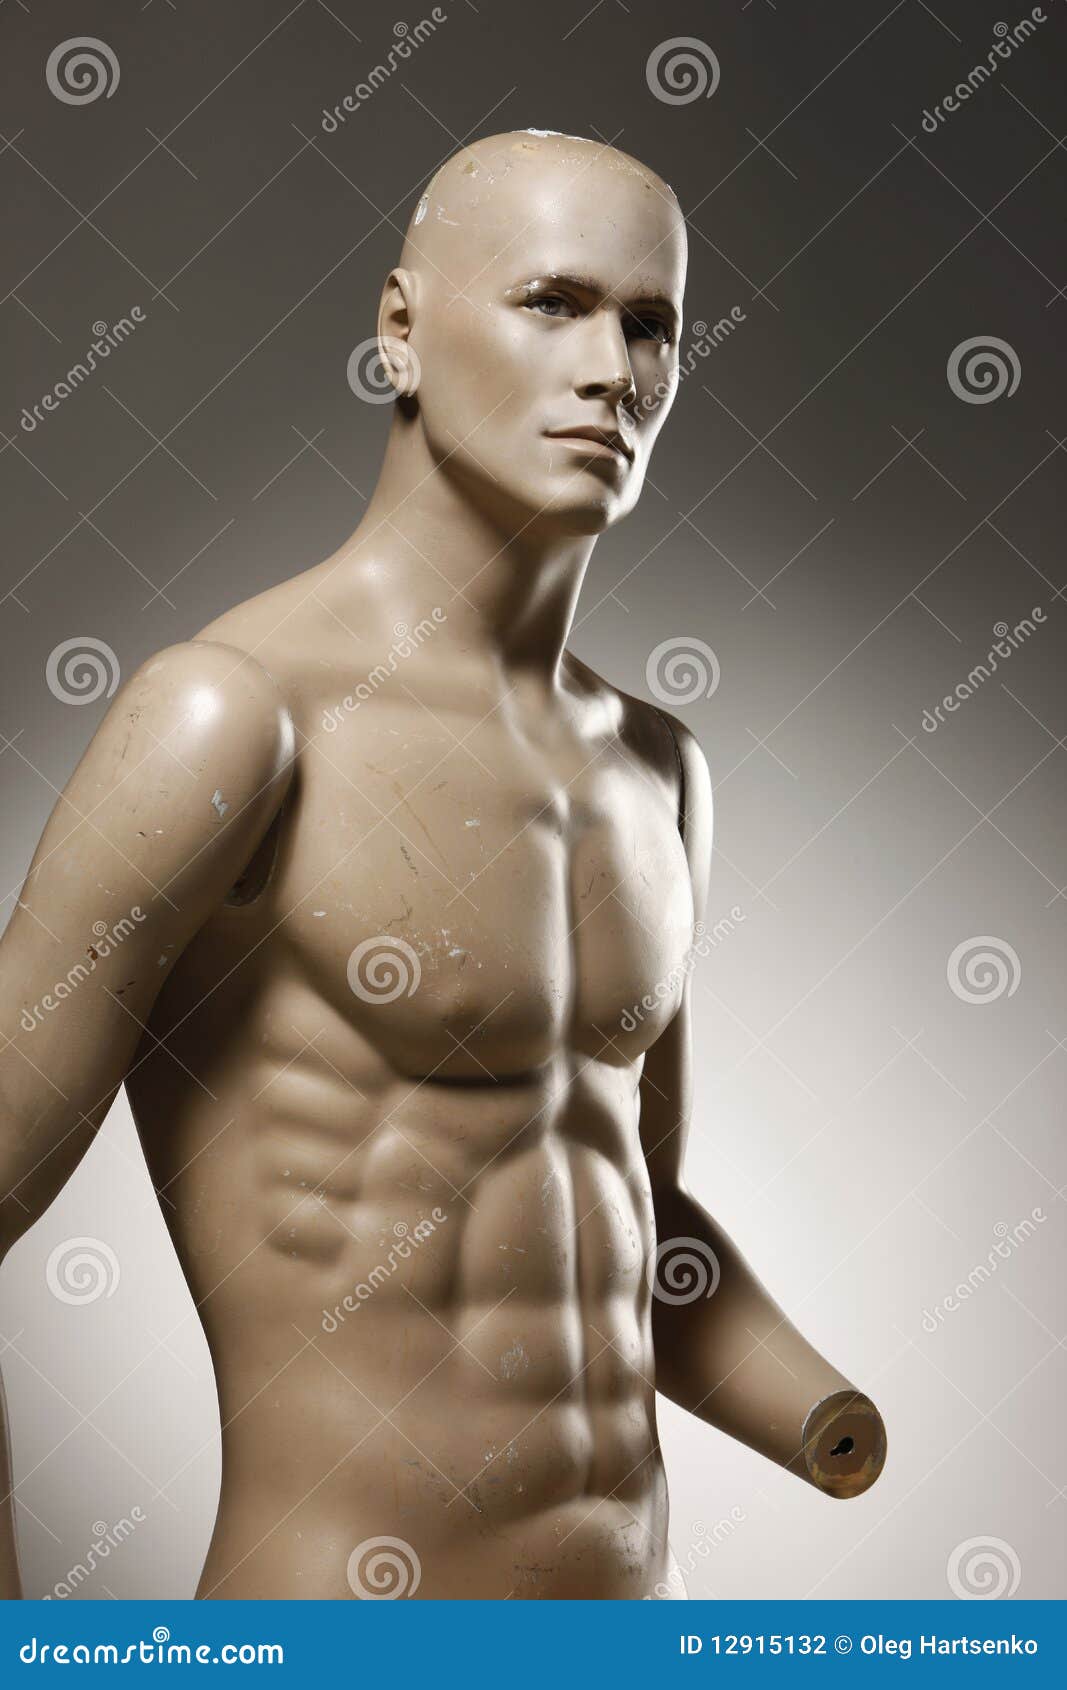 Male mannequin torso with head